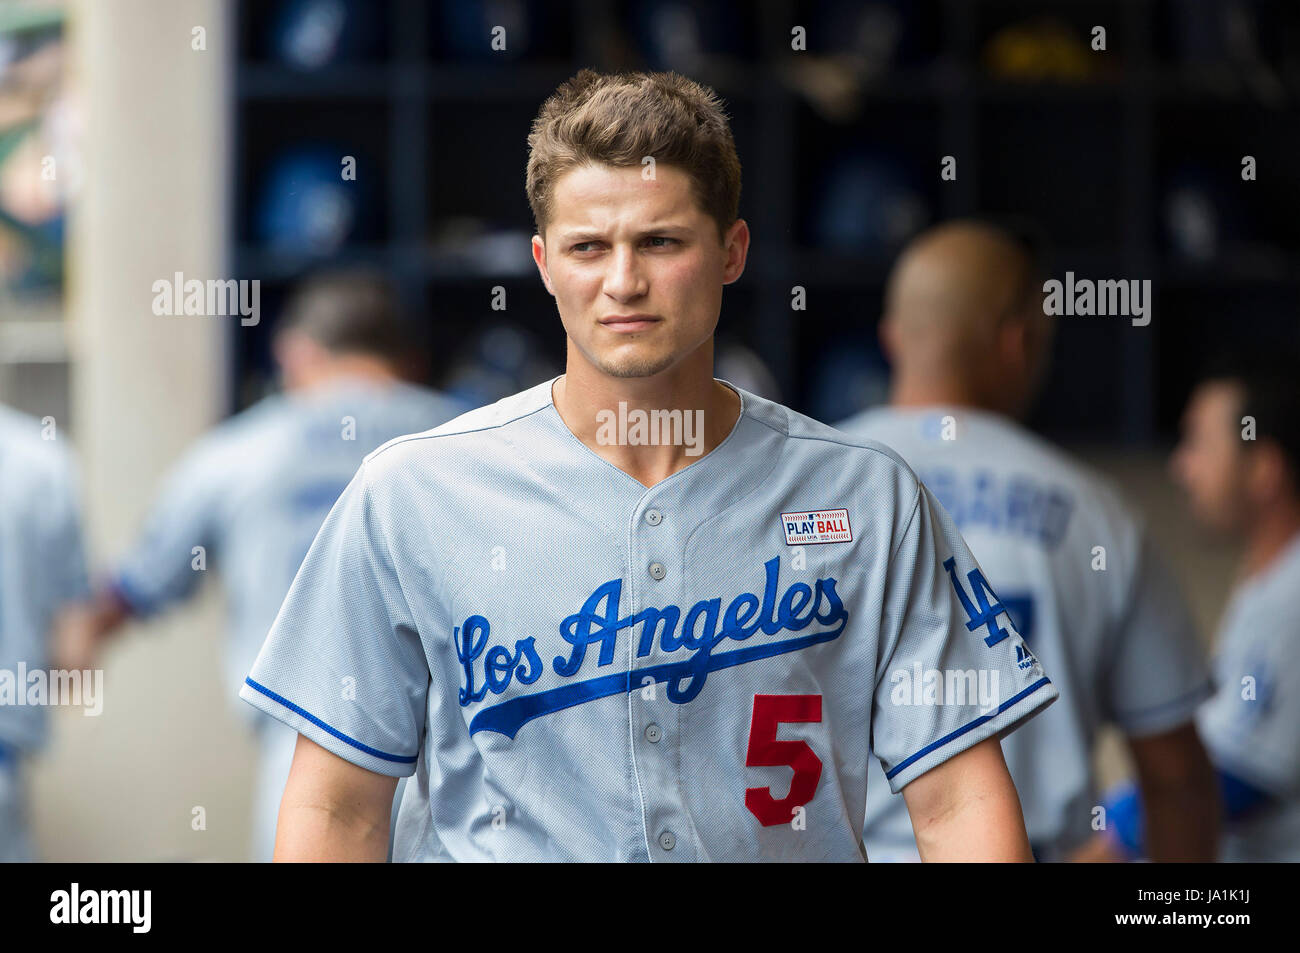 Milwaukee, WI, USA. 3rd June, 2017. Los Angeles Dodgers shortstop Corey Seager #5 during the Major League Baseball game between the Milwaukee Brewers and the Los Angeles Dodgers at Miller Park in Milwaukee, WI. John Fisher/CSM/Alamy Live News Stock Photo